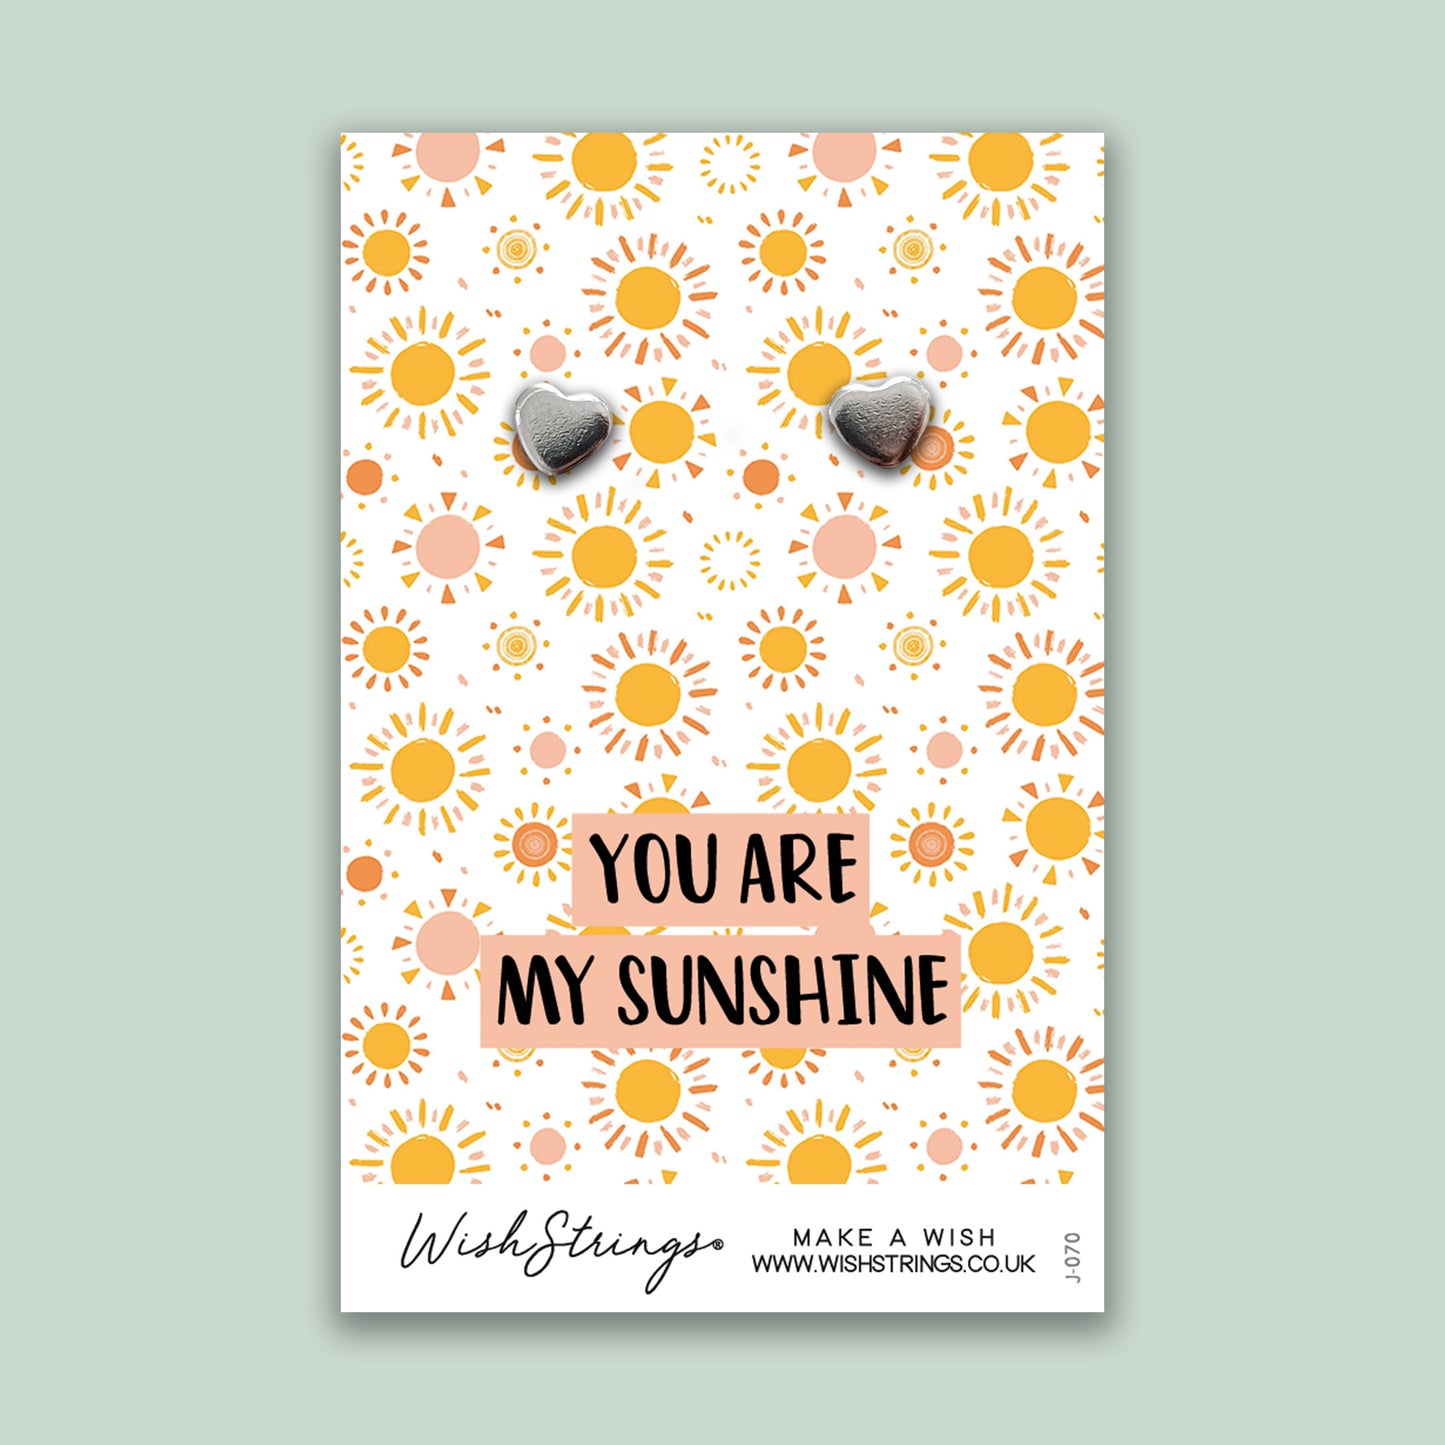 You are my Sunshine - Silver Heart Stud Earrings | 304 Stainless - Hypoallergenic